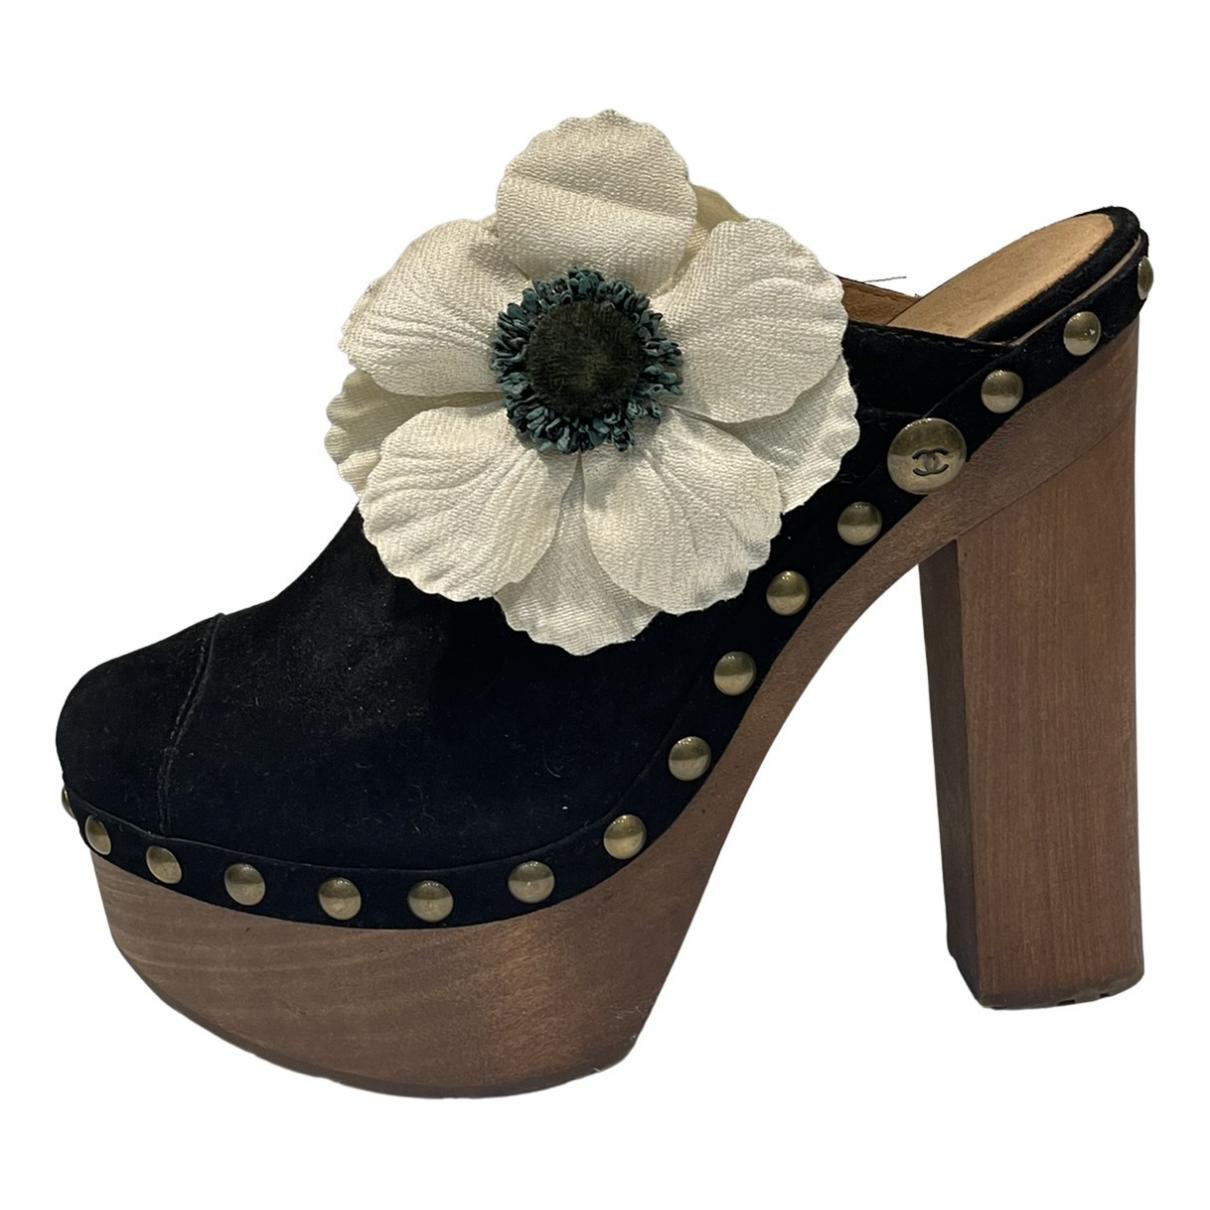 Chanel Open Toe Clogs, Black Floral Suede, Size 39, New in Box WA001